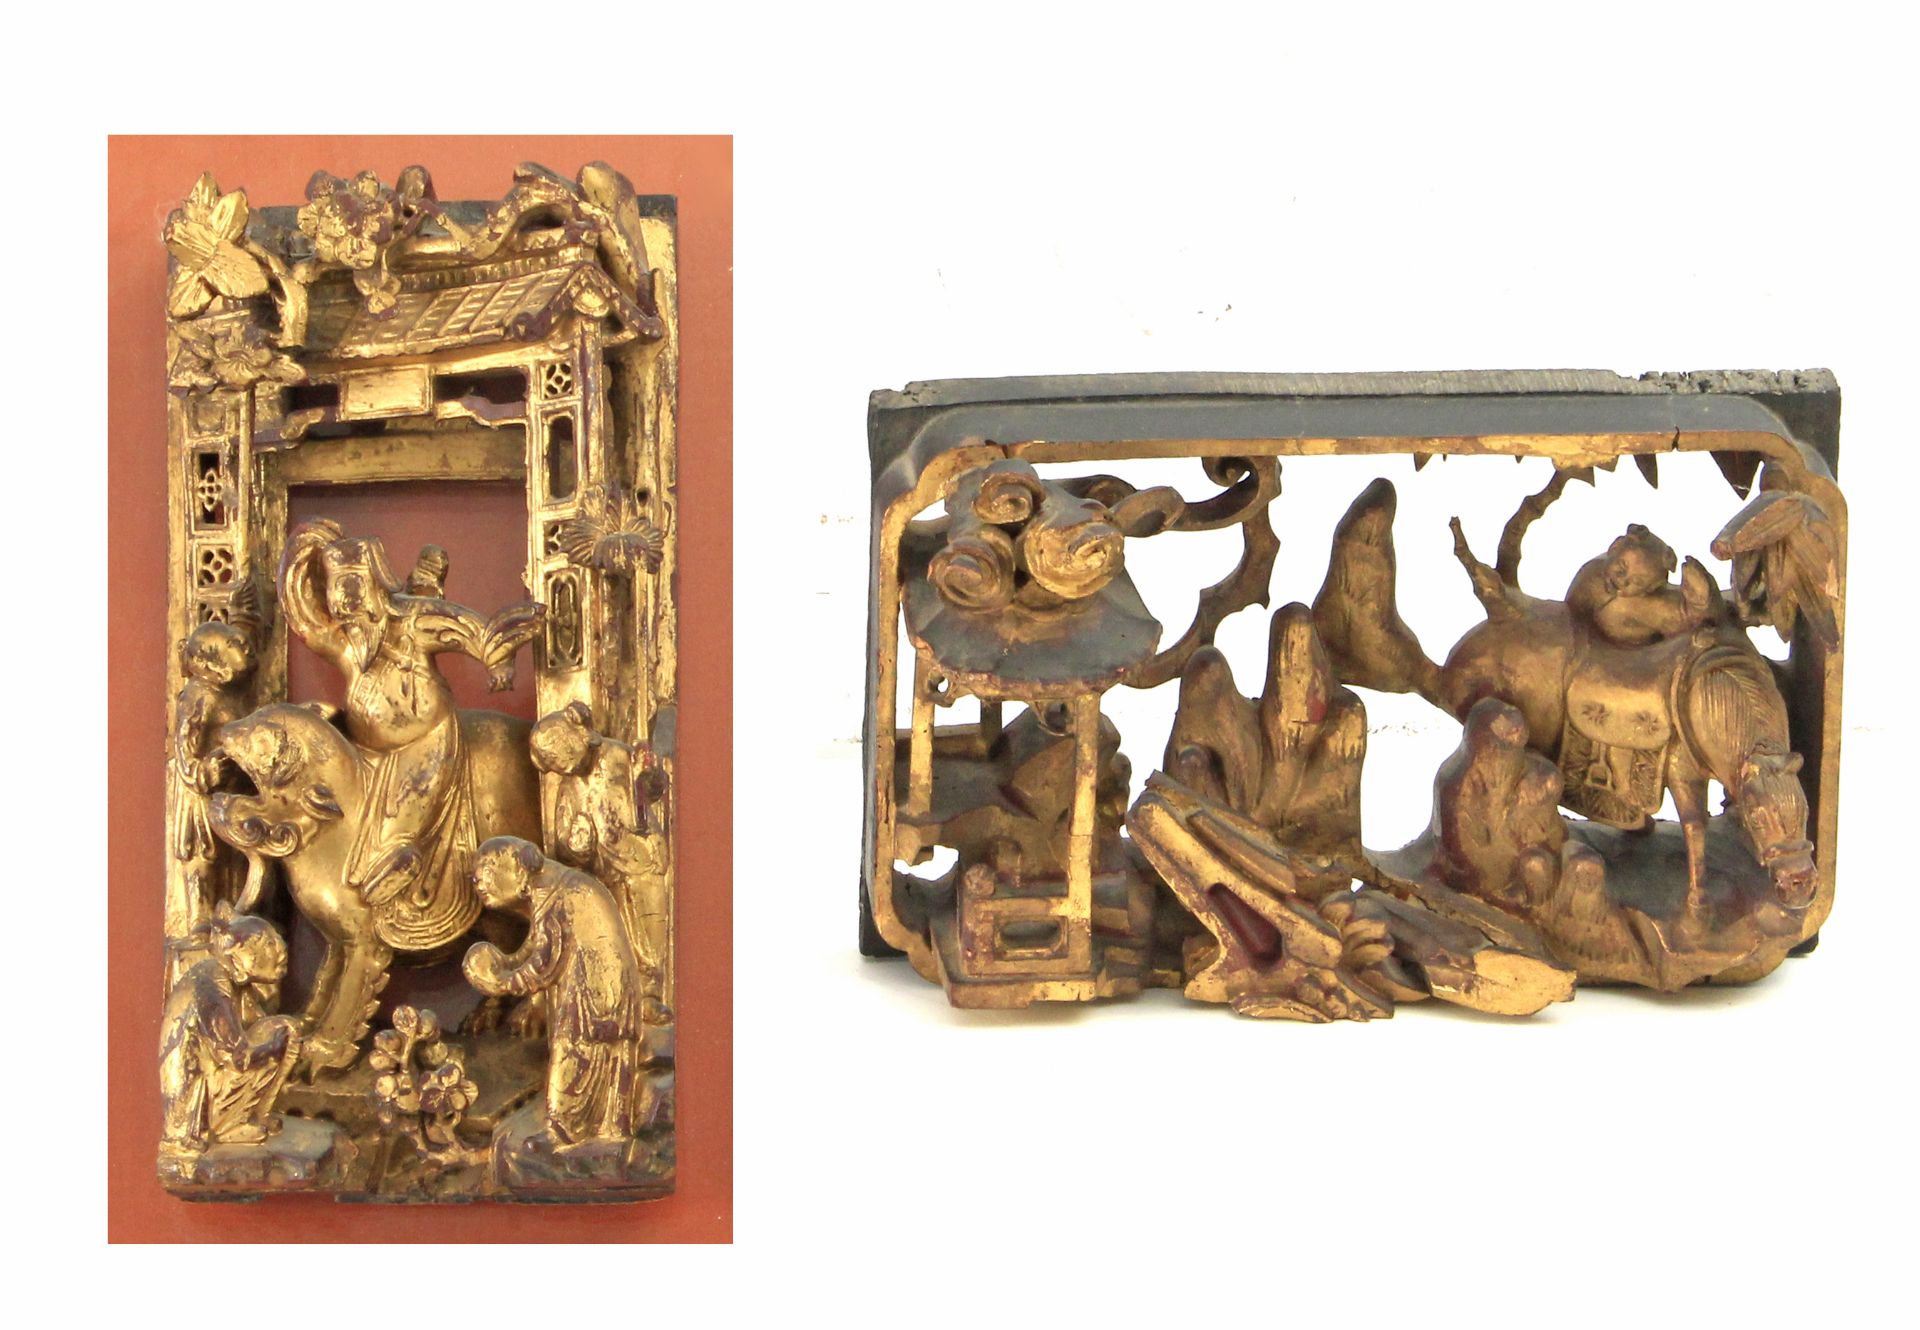 A late 19th century Chinese carvings from Meiji period